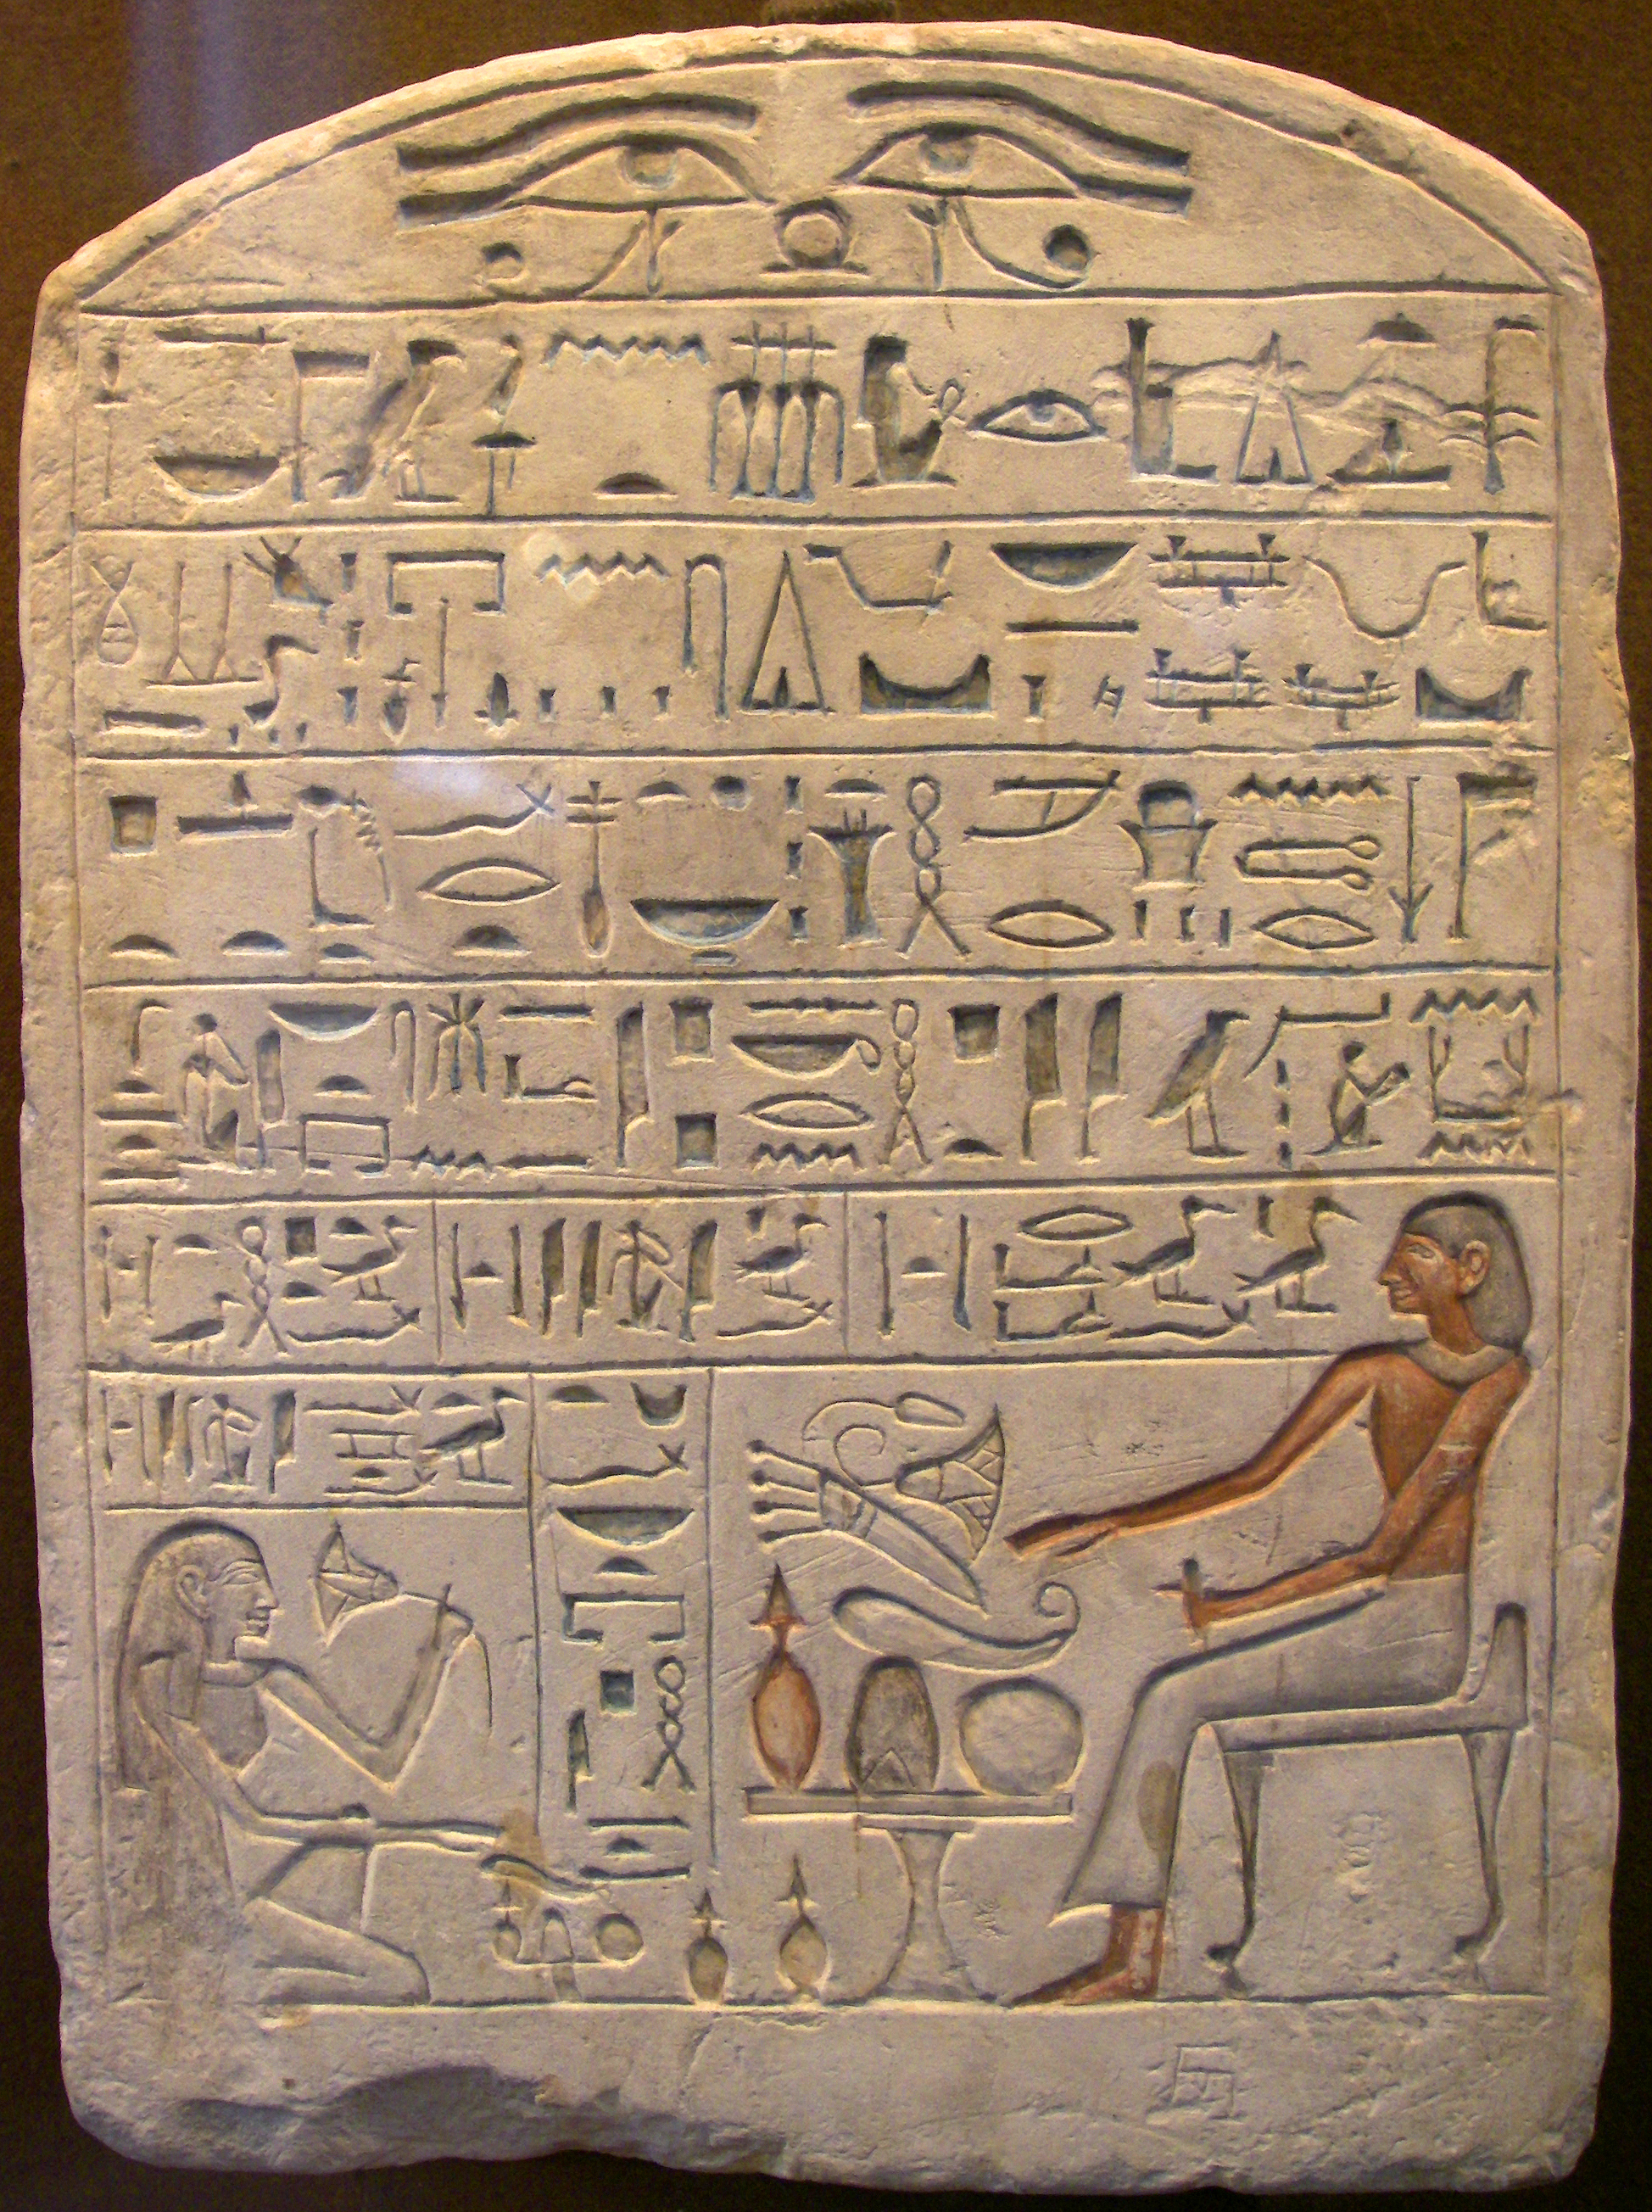 Stela of pepi, chief of the potters describes what so-called Ancient Egyptian offering formula, limestone, ~12th dynasty, XVIII century B.C.E., in Saint Petersburg, Russia.